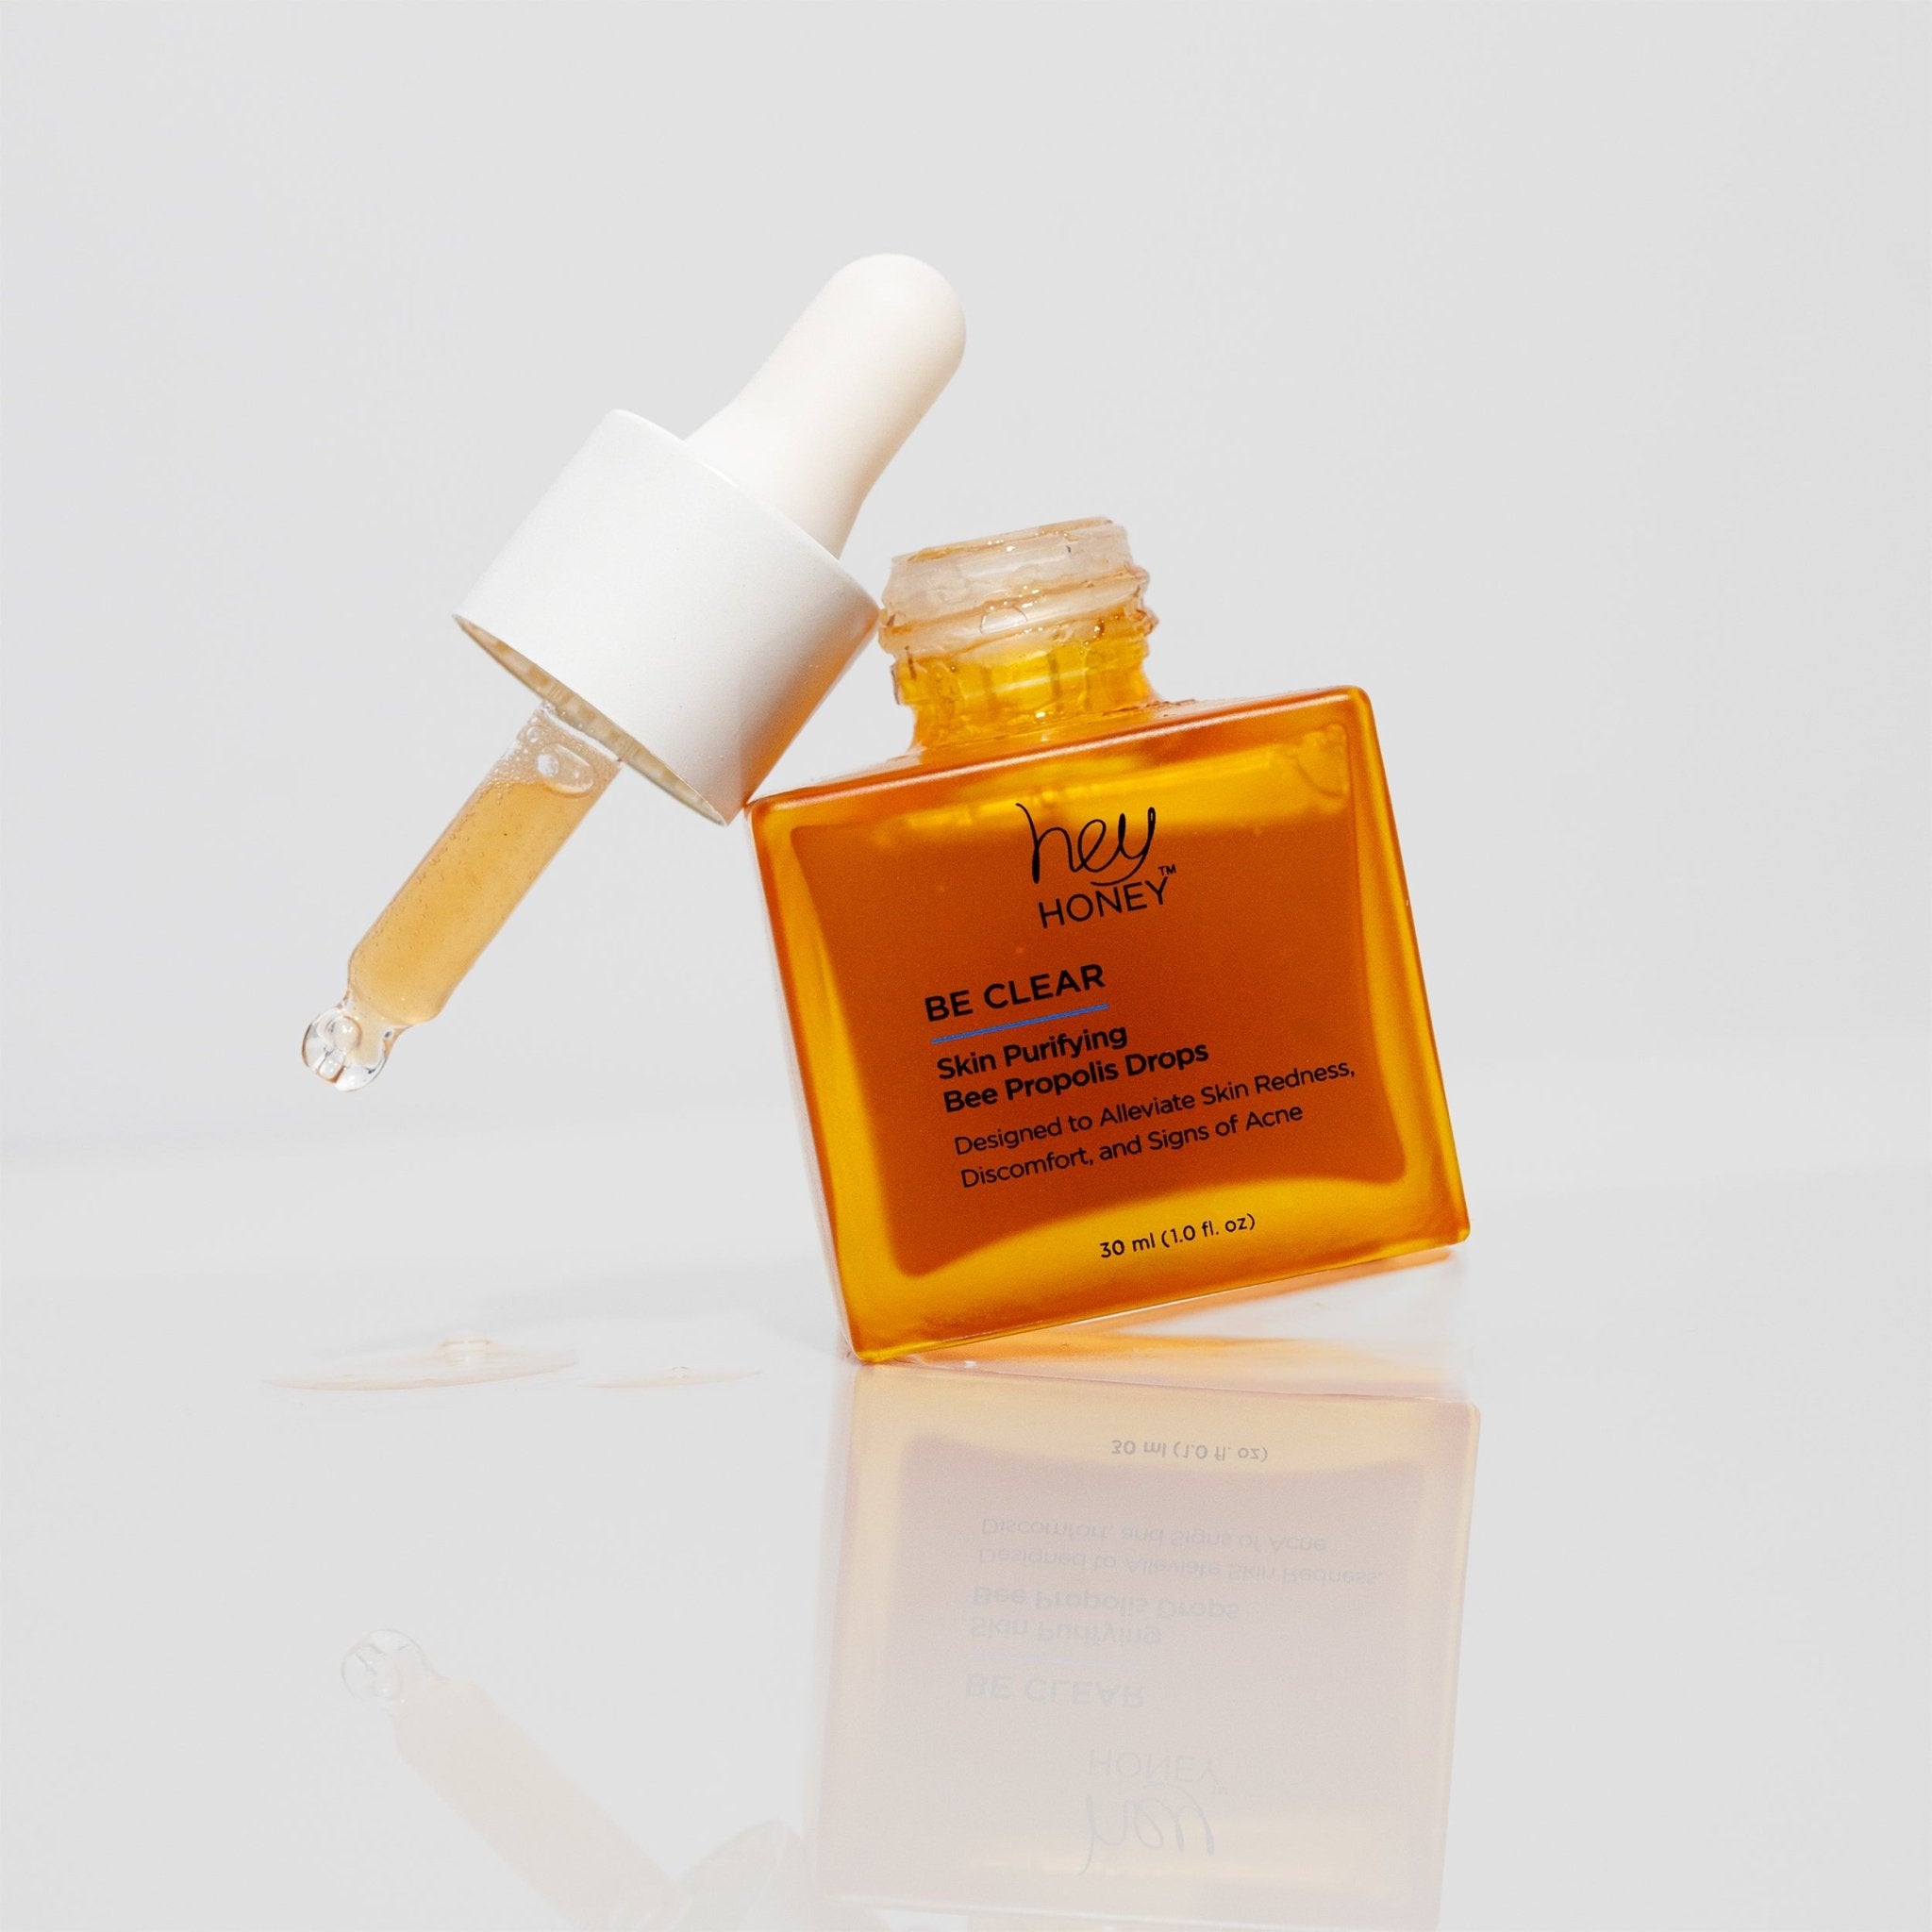 BE CLEAR - Skin Purifying Bee Propolis Concentrated Drops – Hey Honey Beauty